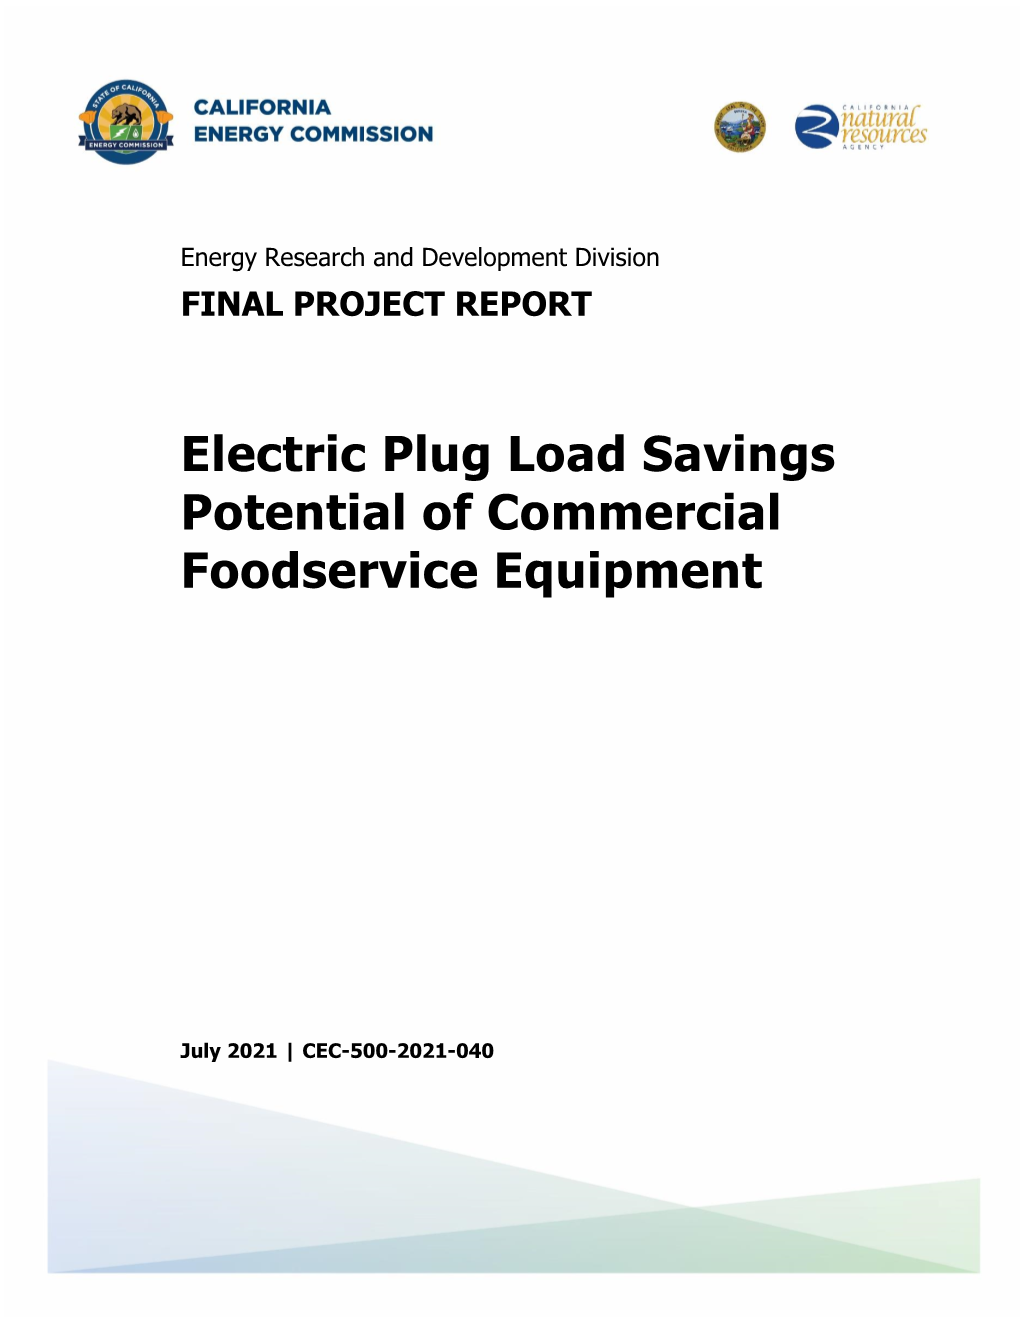 Electric Plug Load Savings Potential of Commercial Foodservice Equipment